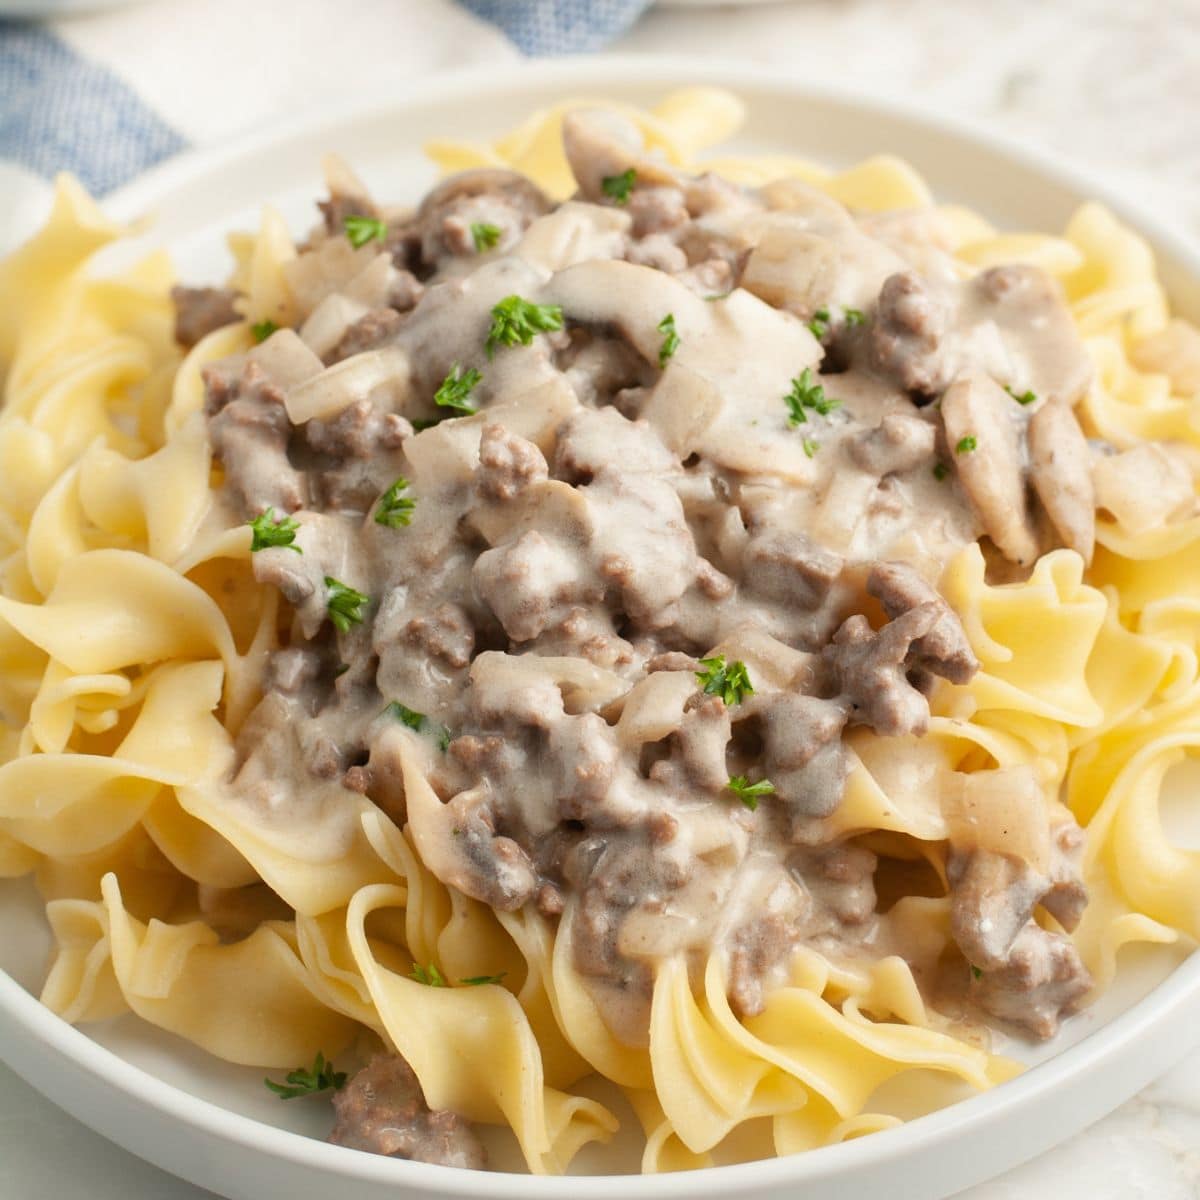 Bow of egg noodles topped with creamy ground beef mixture.